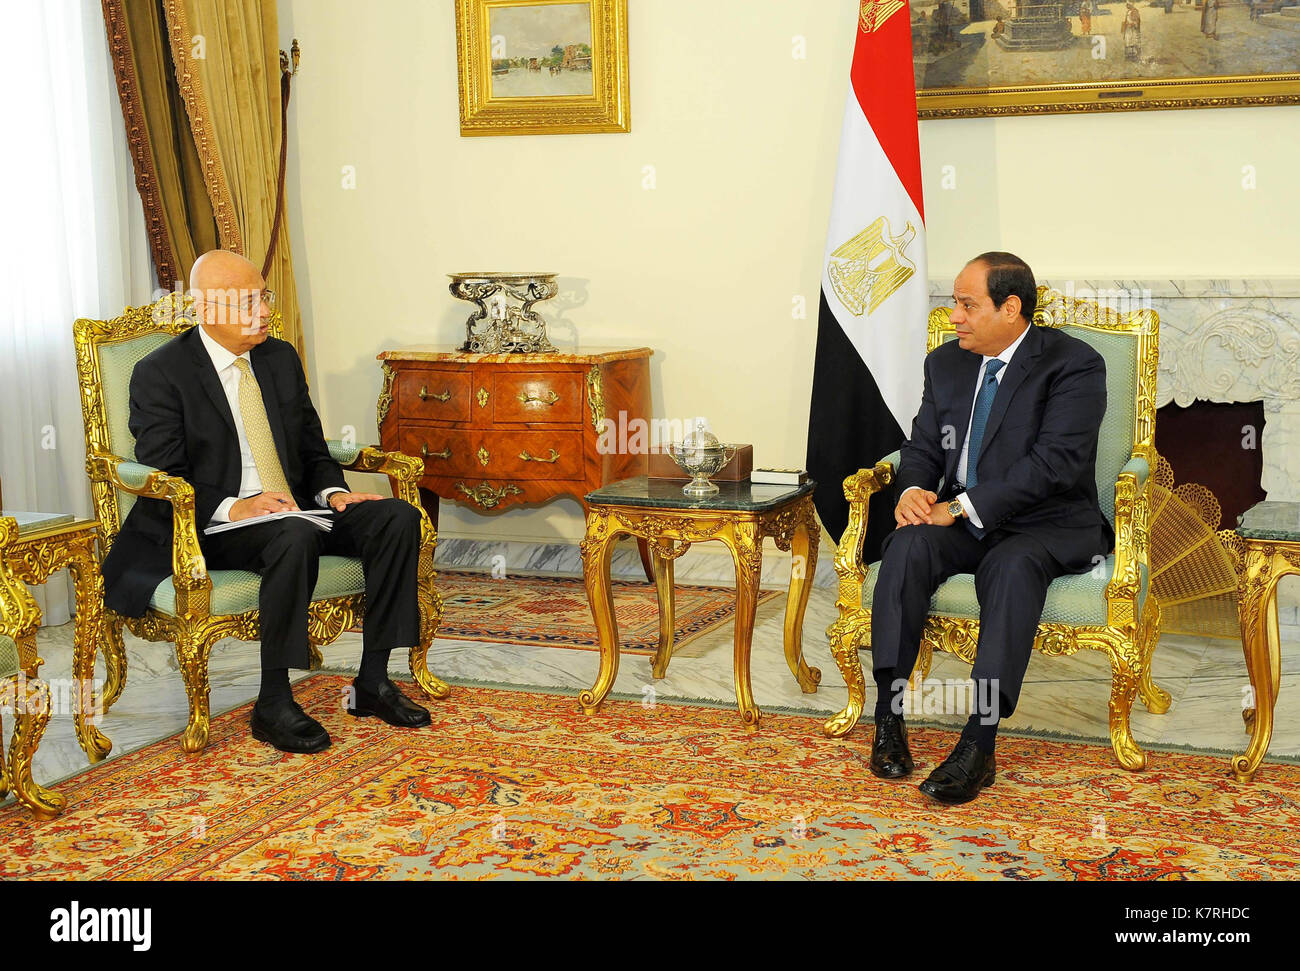 Cairo, Egypt. 16th Sep, 2017. Egyptian President Abdel Fattah al-Sisi meets with Prime Minister Sherif Ismail, in Cairo, Egypt on Sept.16, 2017 Credit: Egyptian President Office/APA Images/ZUMA Wire/Alamy Live News Stock Photo